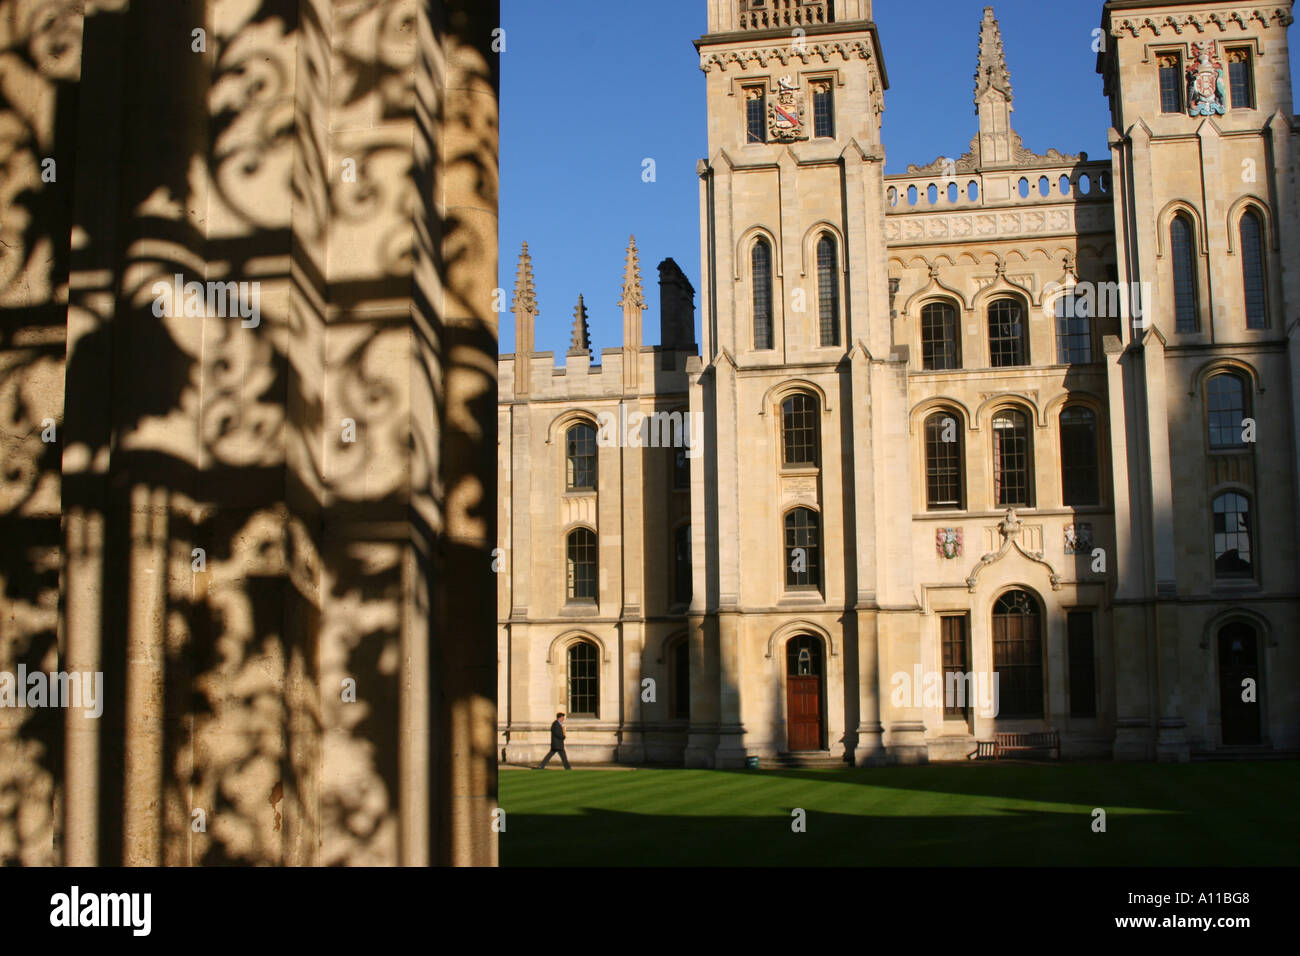 All Souls College University of Oxford Angleterre Iron Gate Shadows Winter Sunshine Université d'Oxford, Angleterre, Royaume-Uni Banque D'Images